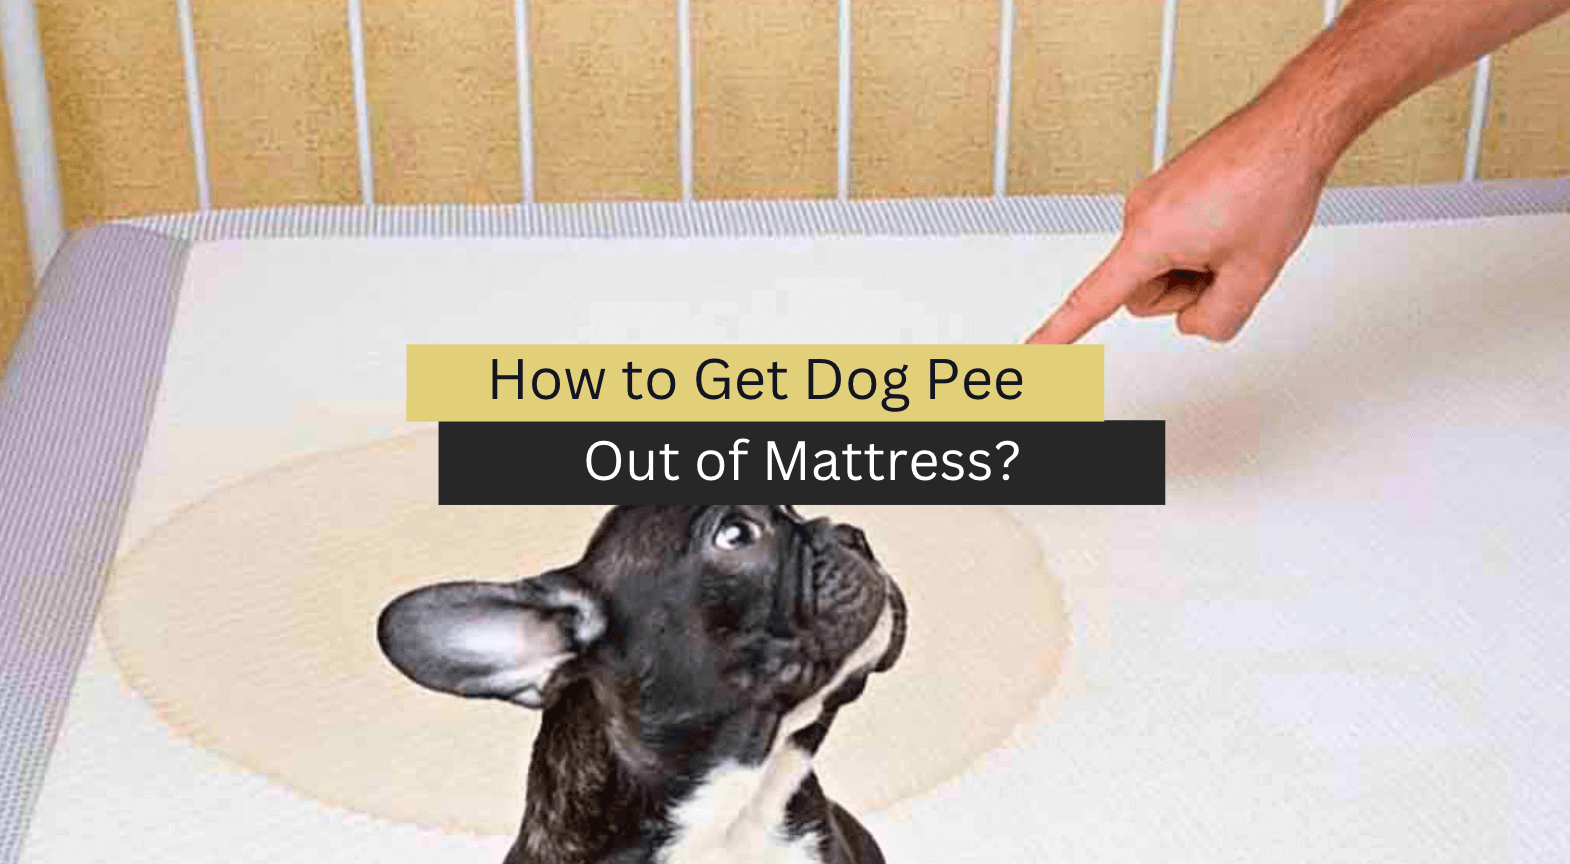 How to Get Dog Pee Out of Mattress? (A Step-By-Step Guide)